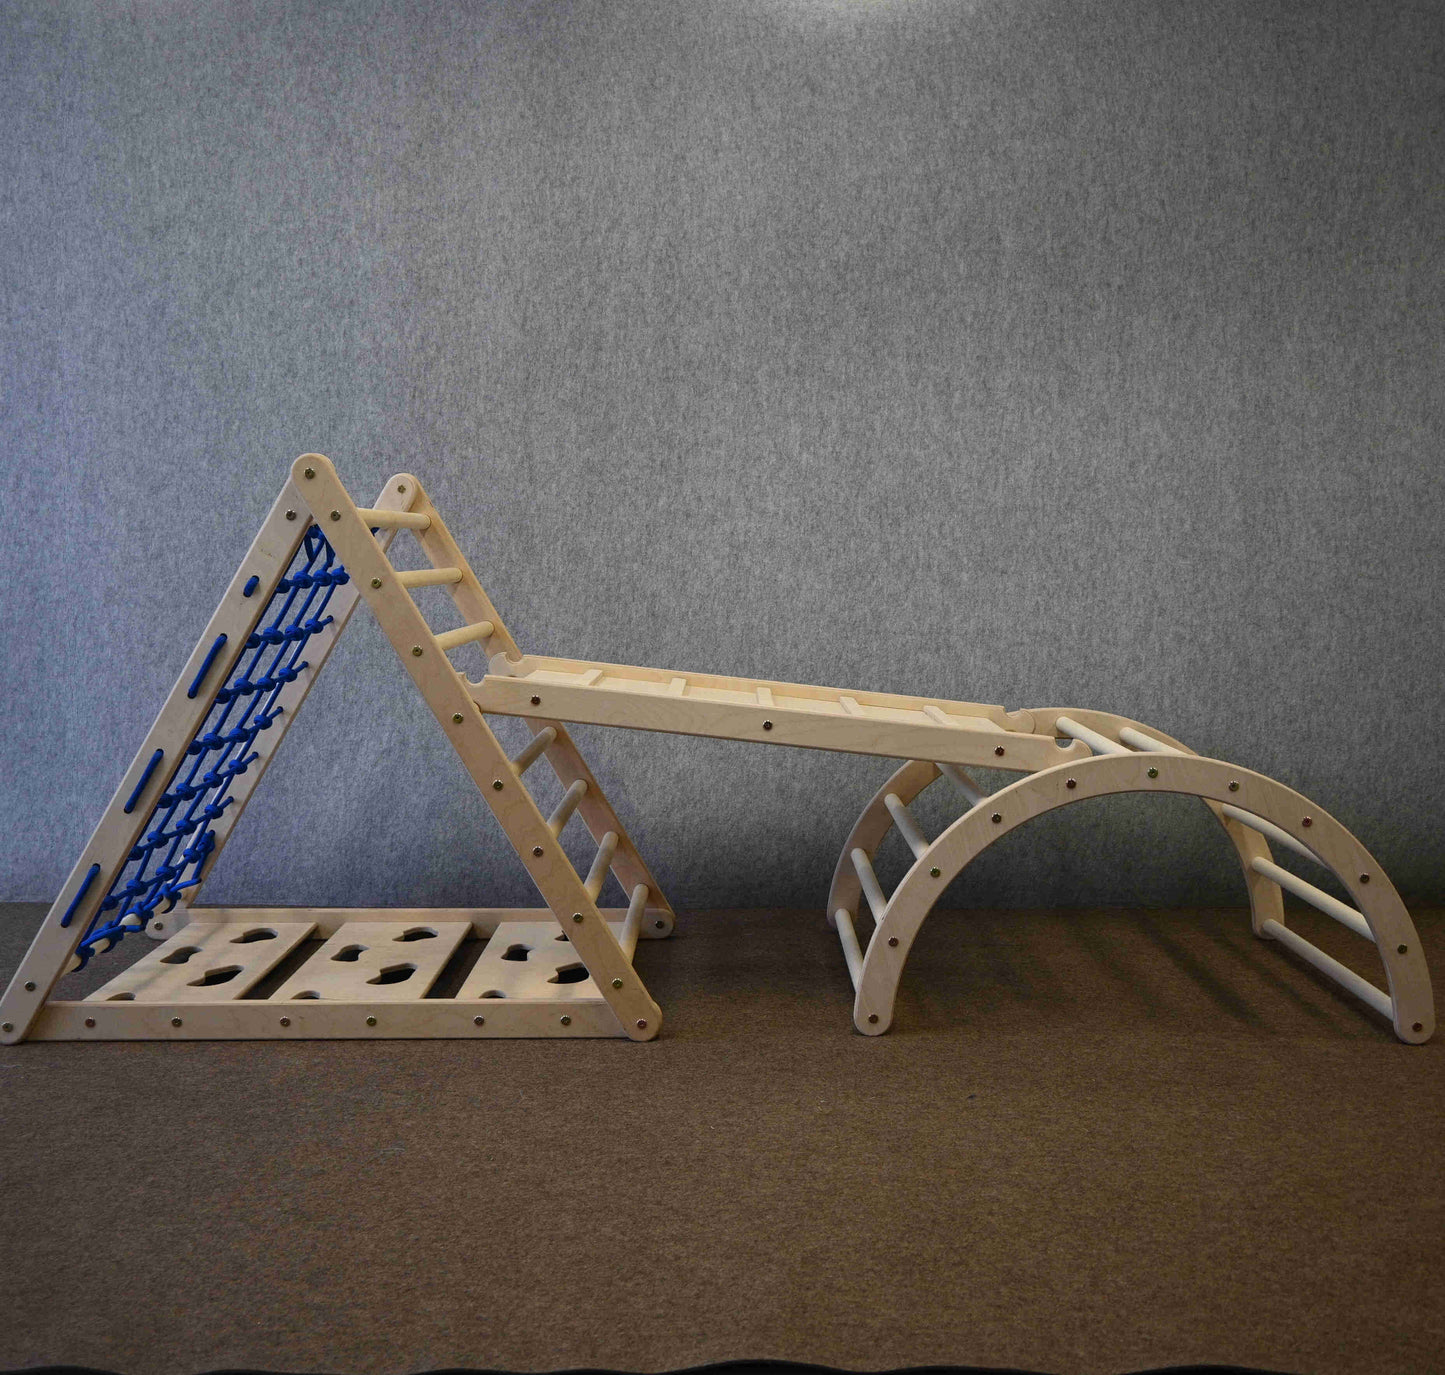 Climbing set lion - climbing triangle, chicken ladder &amp; arch, various rope colors